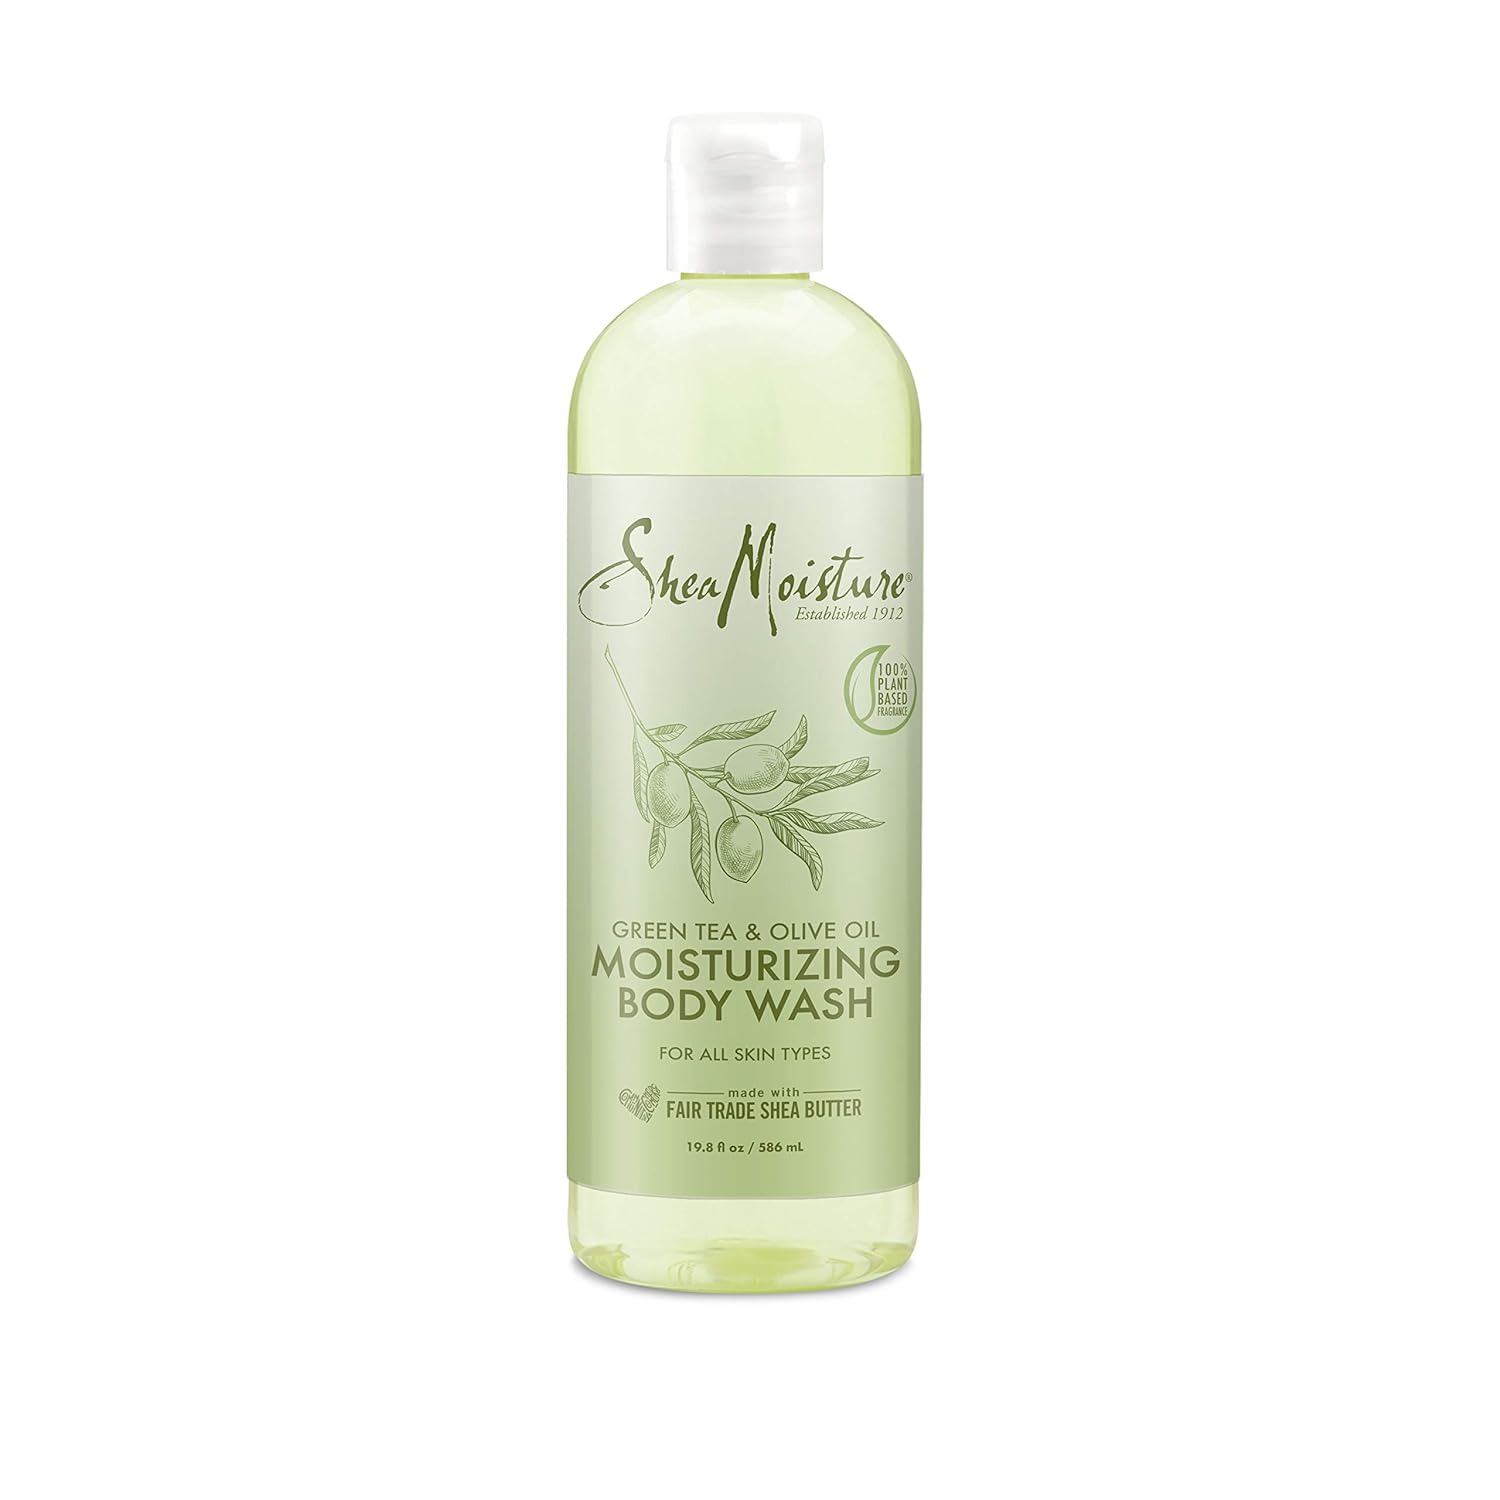 SheaMoisture Body Wash for All Skin Types Moisturizing Olive Oil & Green Tea Cruelty Free Made with Fair Trade Shea Butter, 19.8 Oz